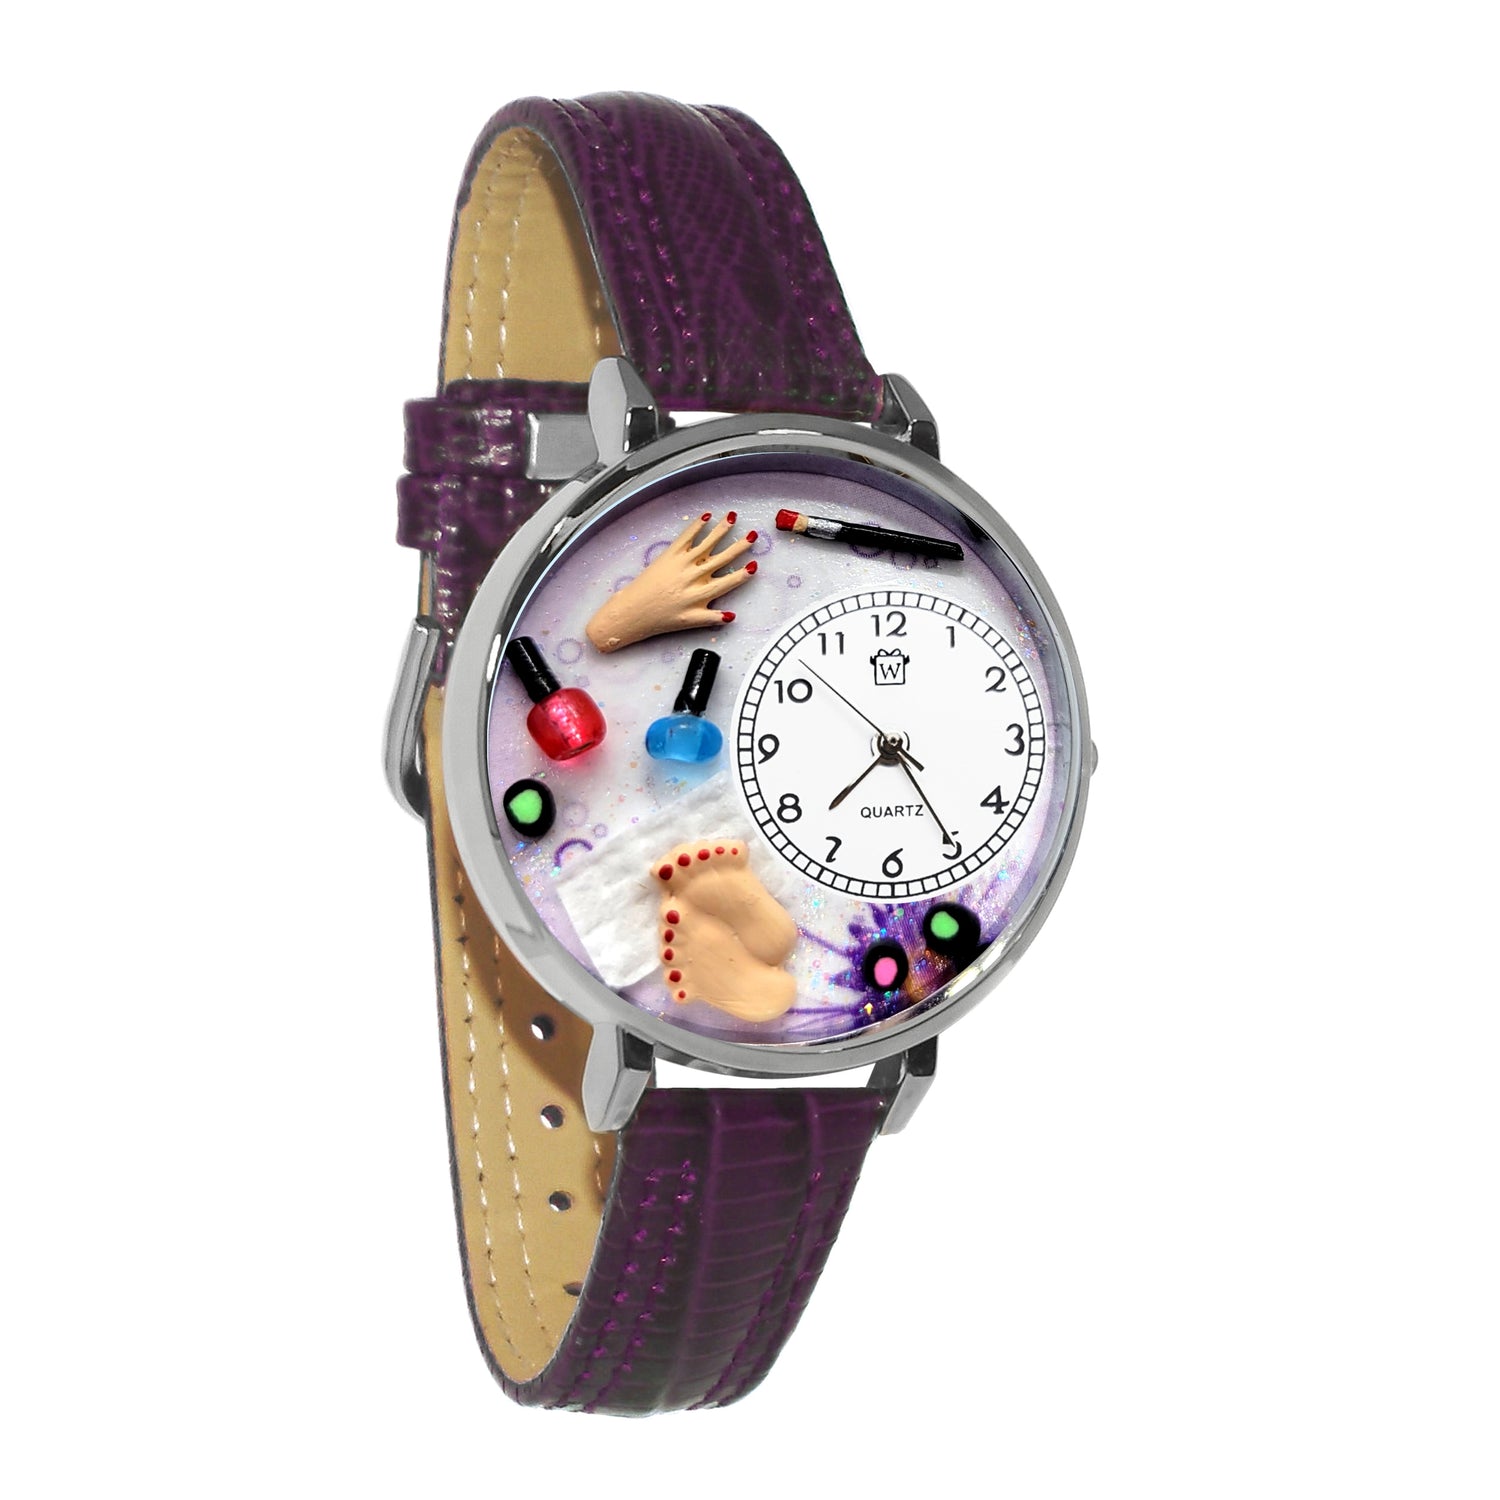 Whimsical Gifts | Nail Tech | Manicurist | 3D Watch Large Style | Handmade in USA | Professions Themed | Salon & Spa Professions | Novelty Unique Fun Miniatures Gift | Silver Finish Purple Leather Watch Band